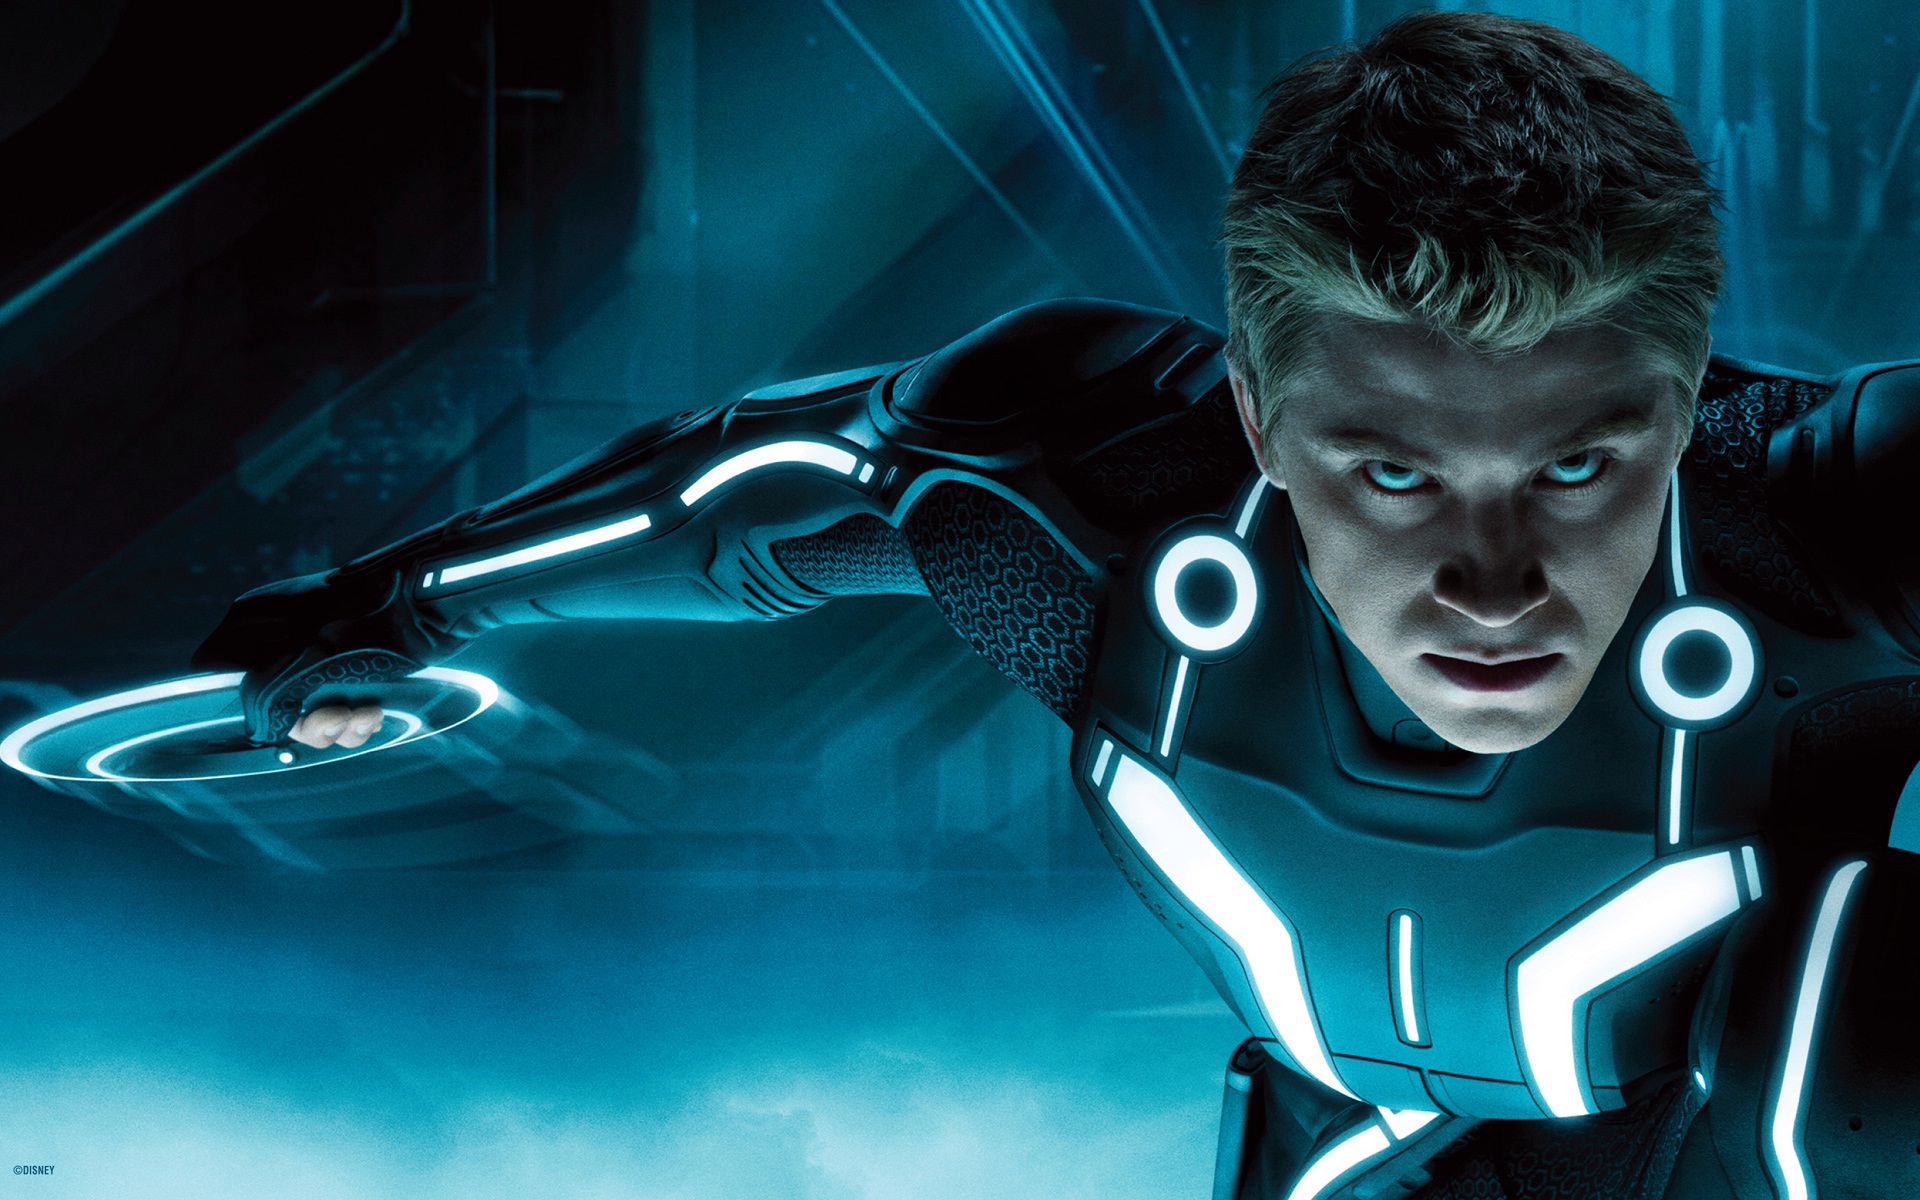 Tron Legacy Wallpaper  Download to your mobile from PHONEKY